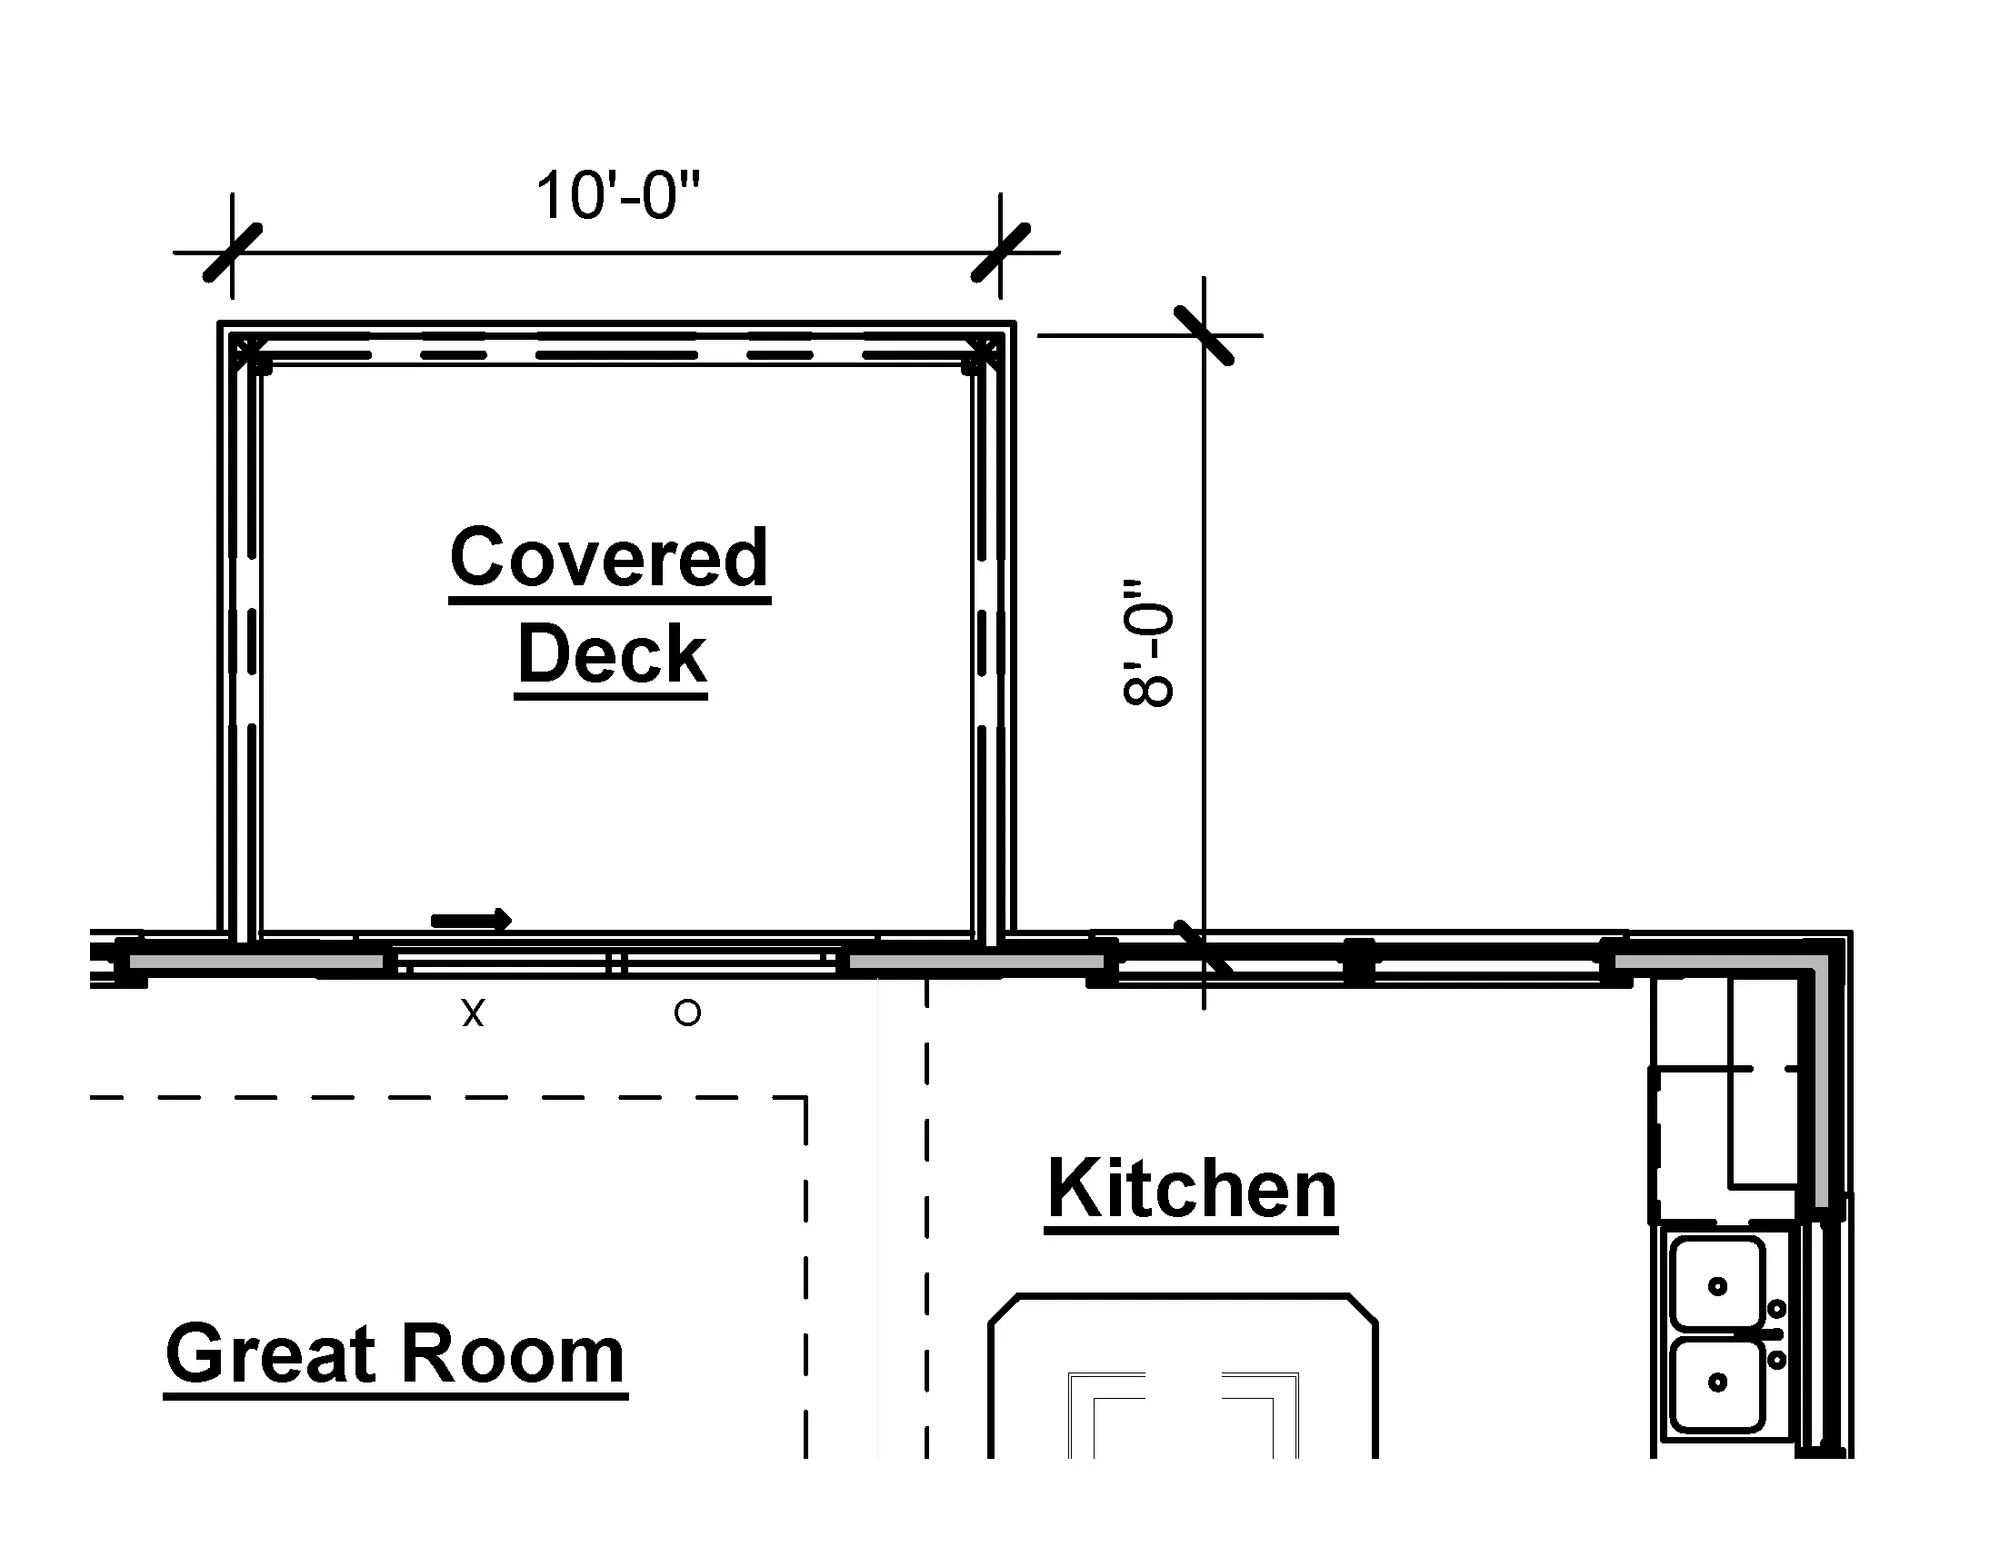 Covered Deck Option - undefined